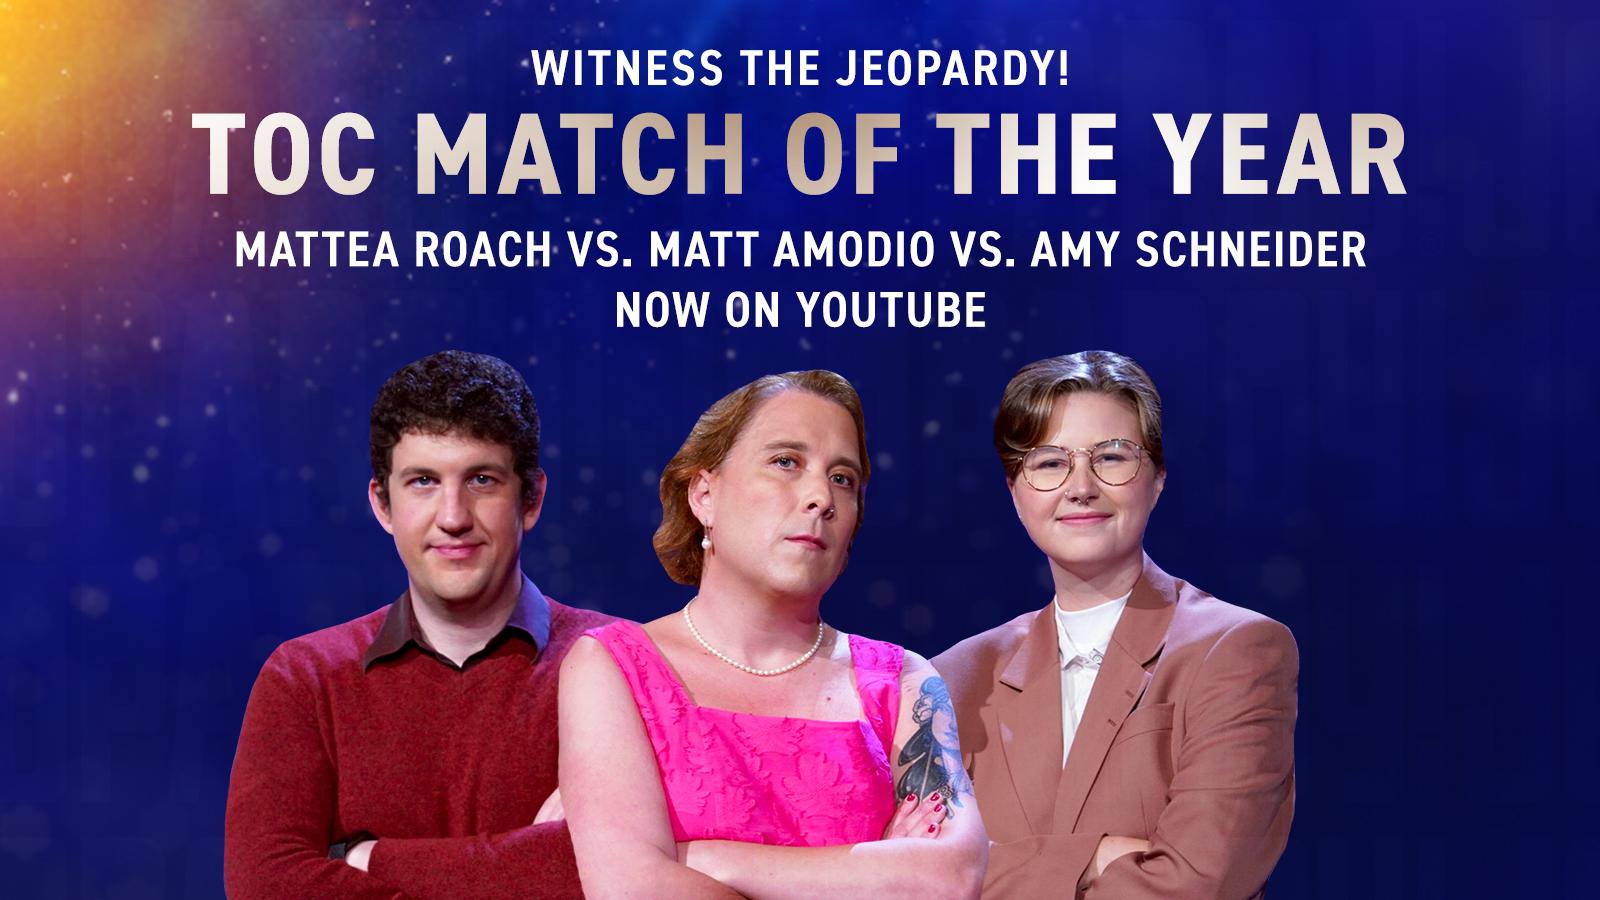 Witness the Jeopardy! ToC Match of the Year: Mattea Roach vs. Matt Amodio vs. Amy Schneider, Now on YouTube